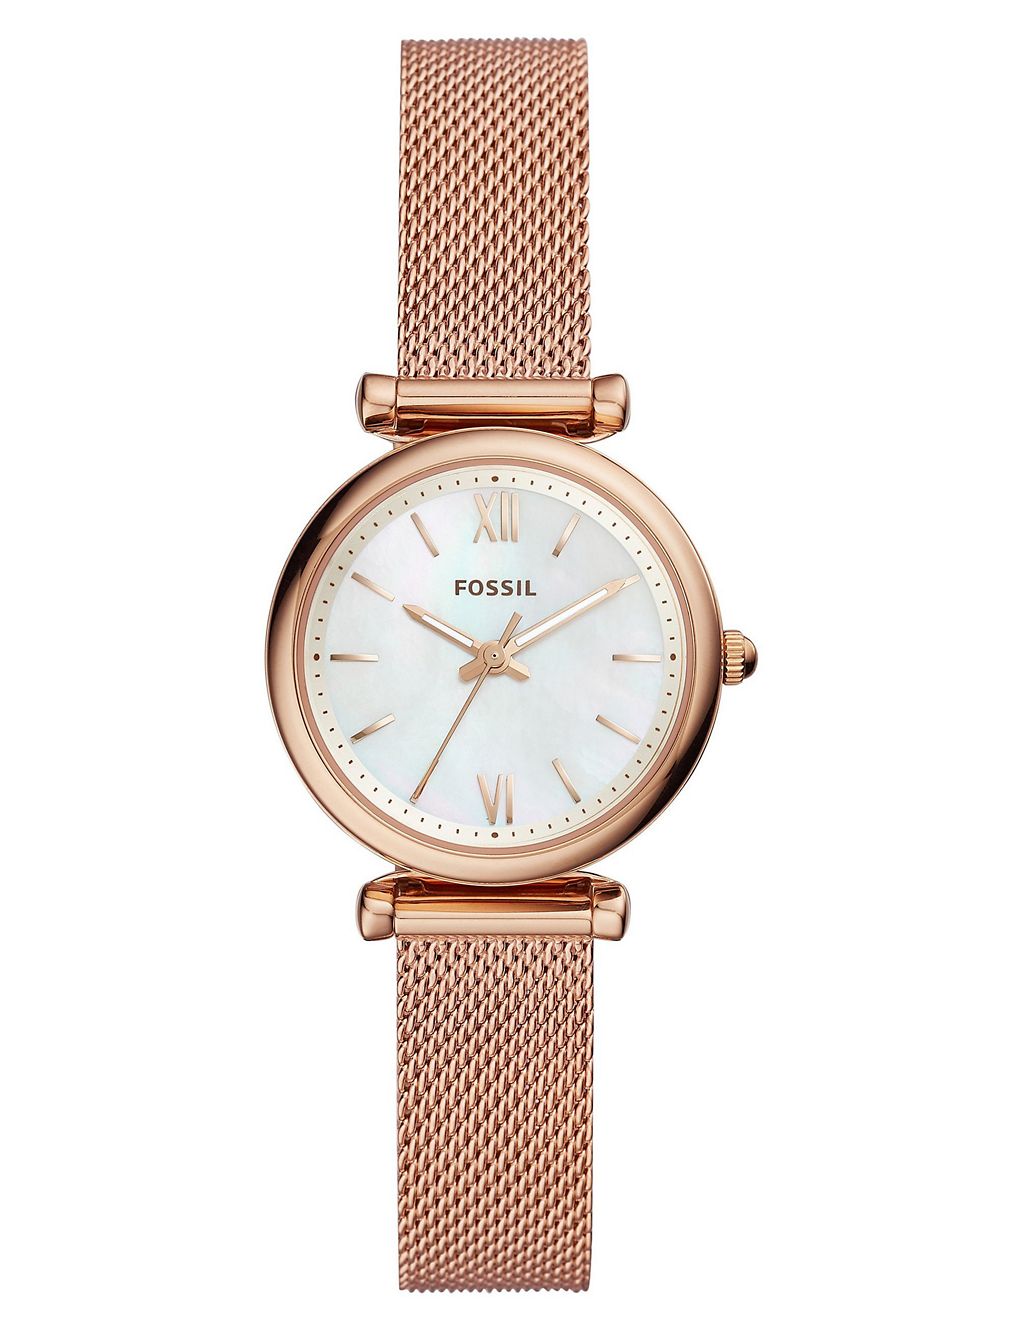 Fossil Carlie Rose Gold Metal Watch 3 of 3